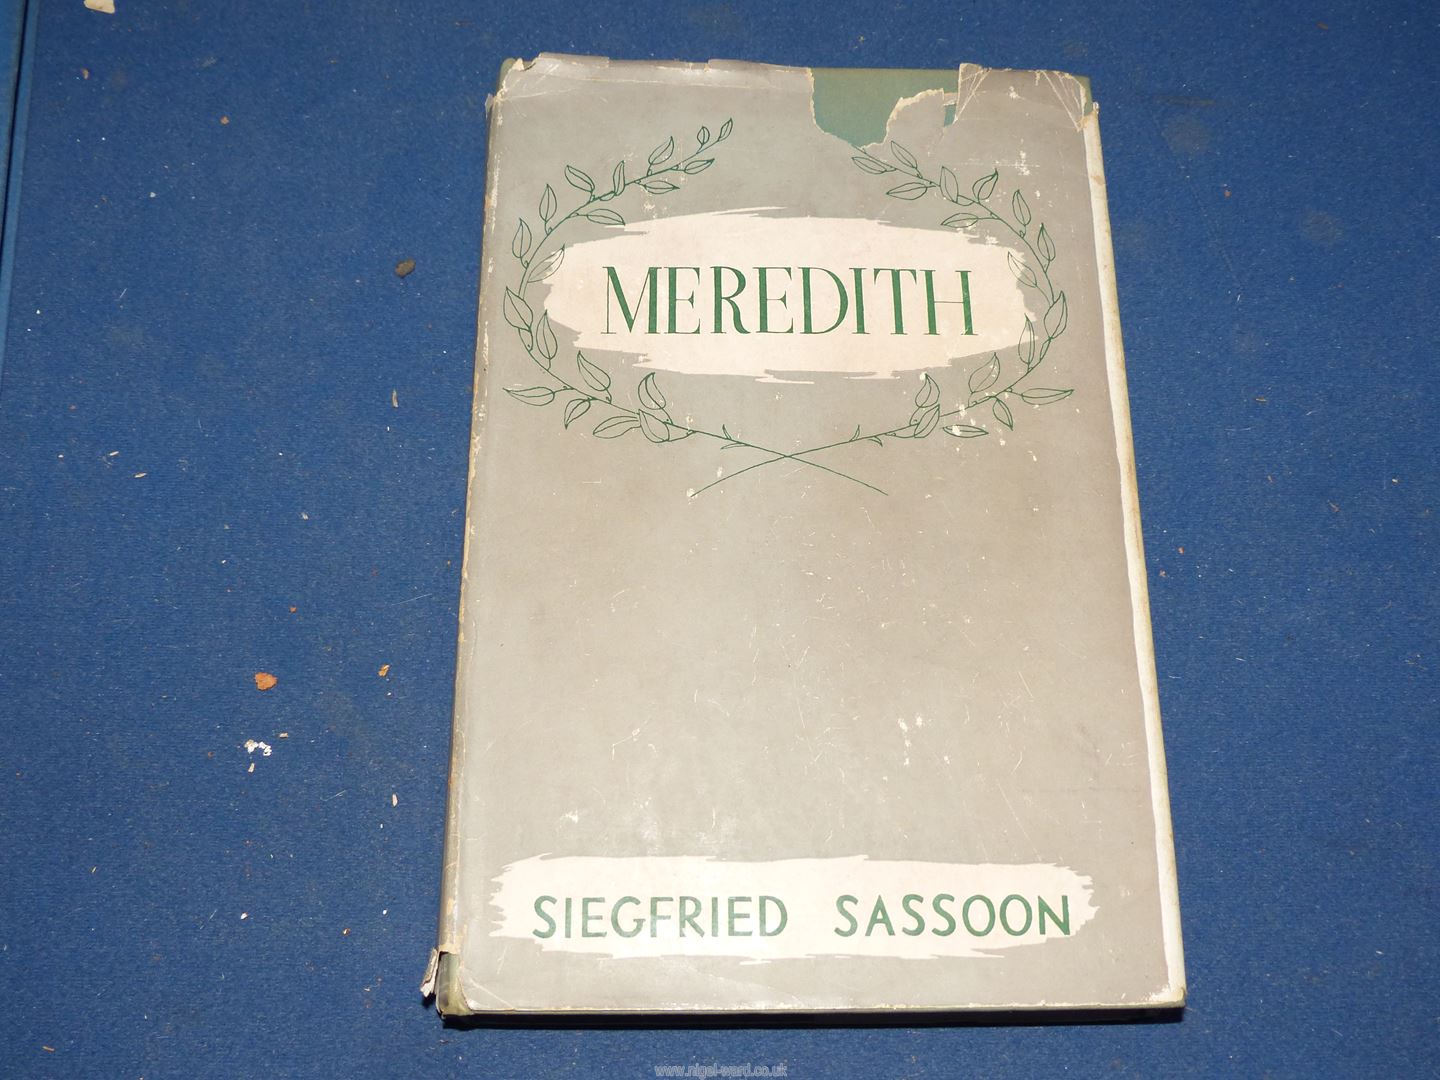 A small collection of works by Siegfried Sassoon including Memoirs of a Fox-Hunting Gentleman - Image 23 of 29